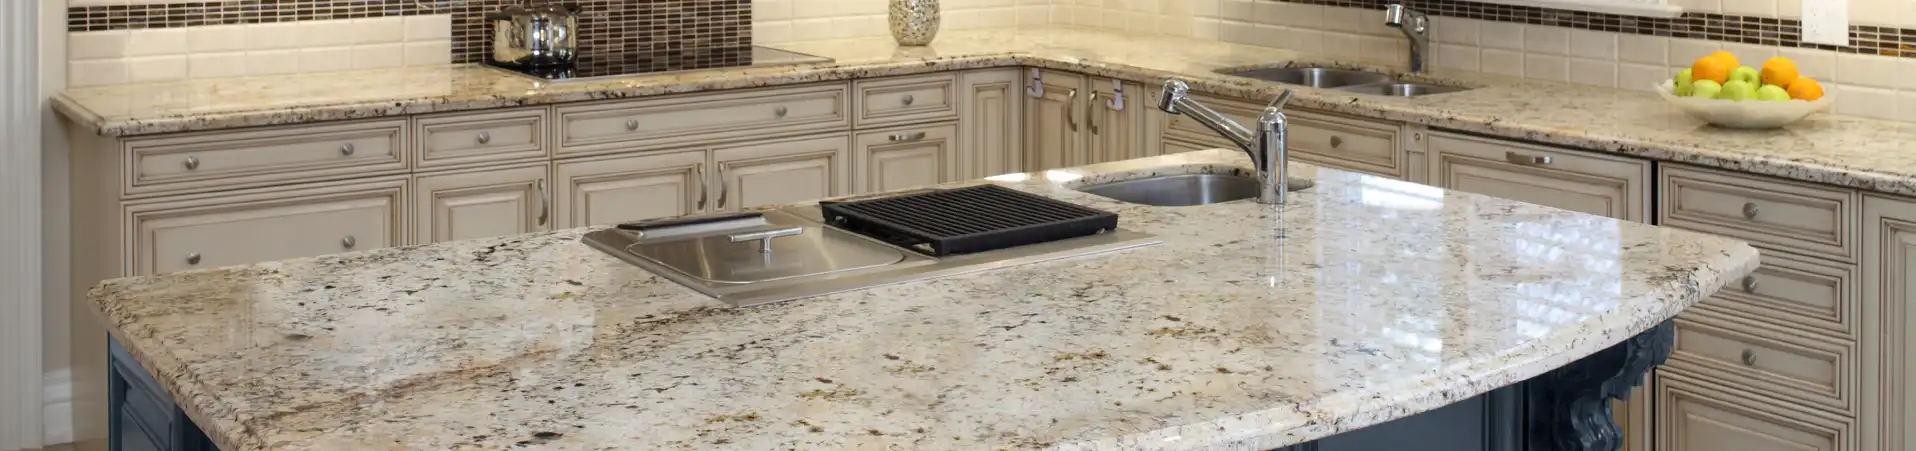 Photo of clean, newley refishied granite kitchen coutertops